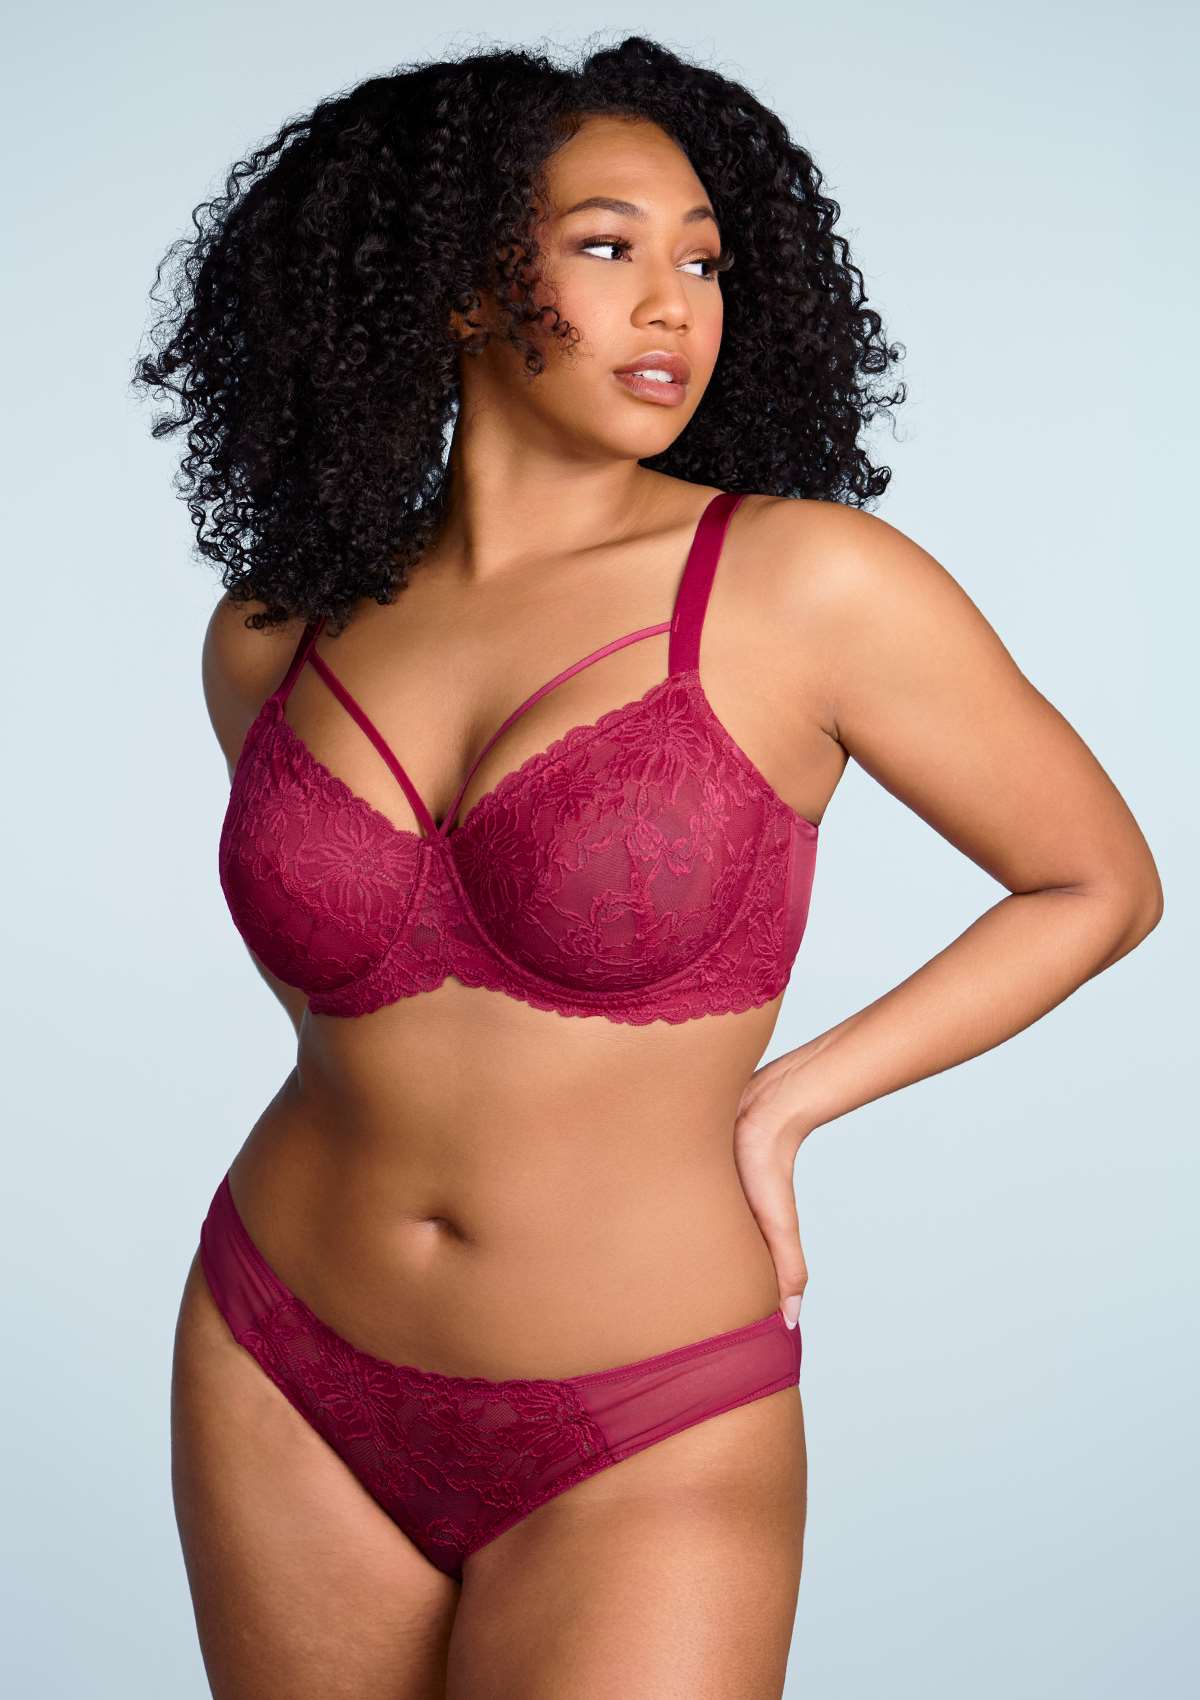 HSIA Pretty In Petals Lace Panties And Bra Set: Plus Size Women Bra - Red / 42 / I